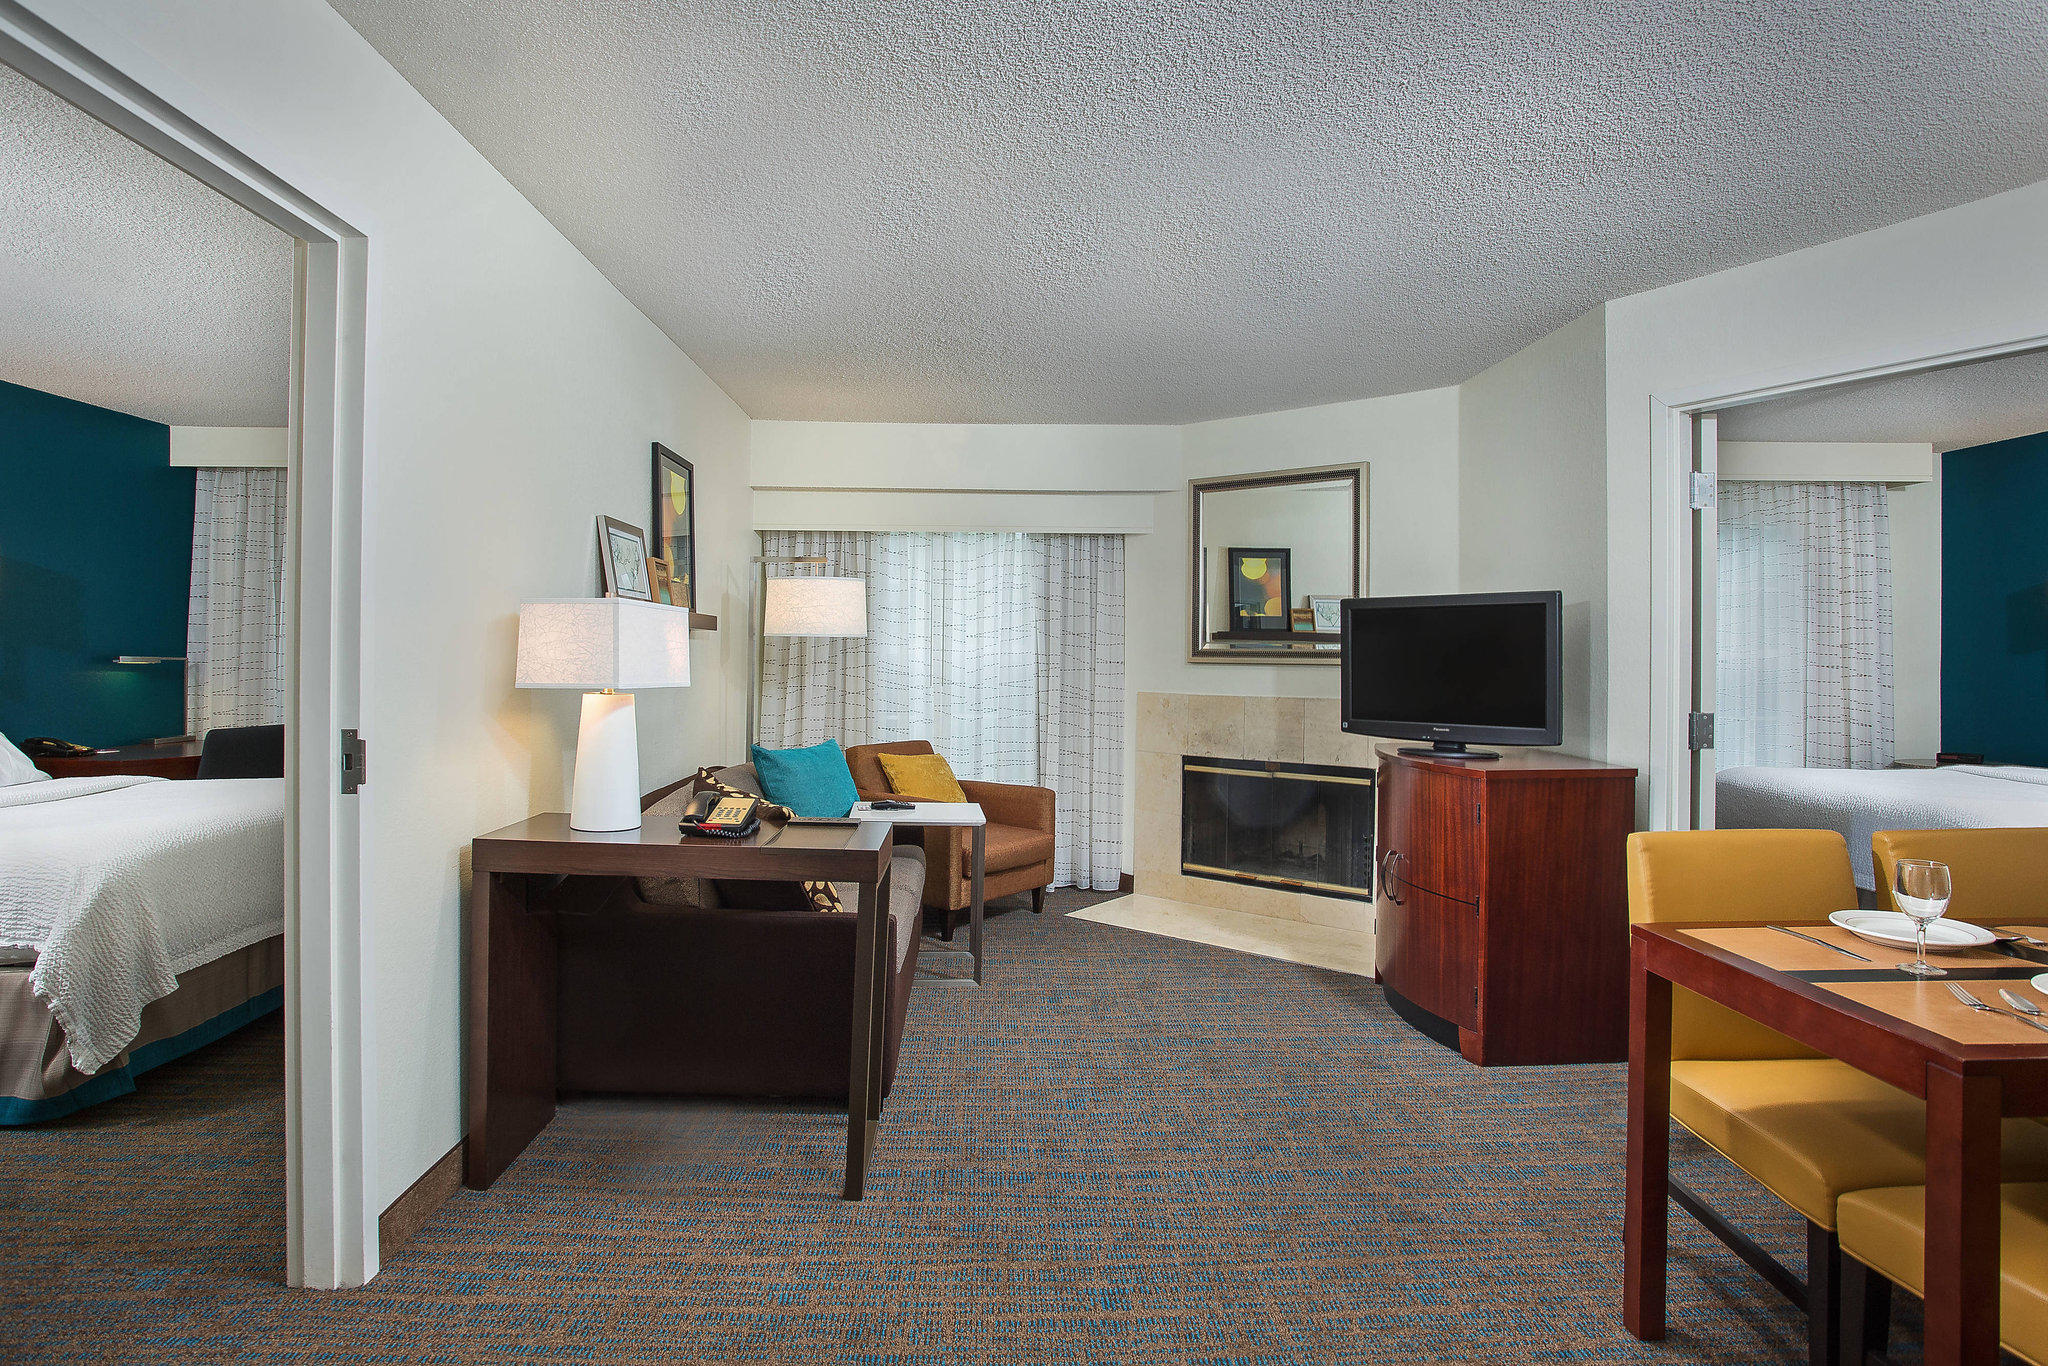 Residence Inn by Marriott Knoxville Cedar Bluff, Knoxville Tennessee